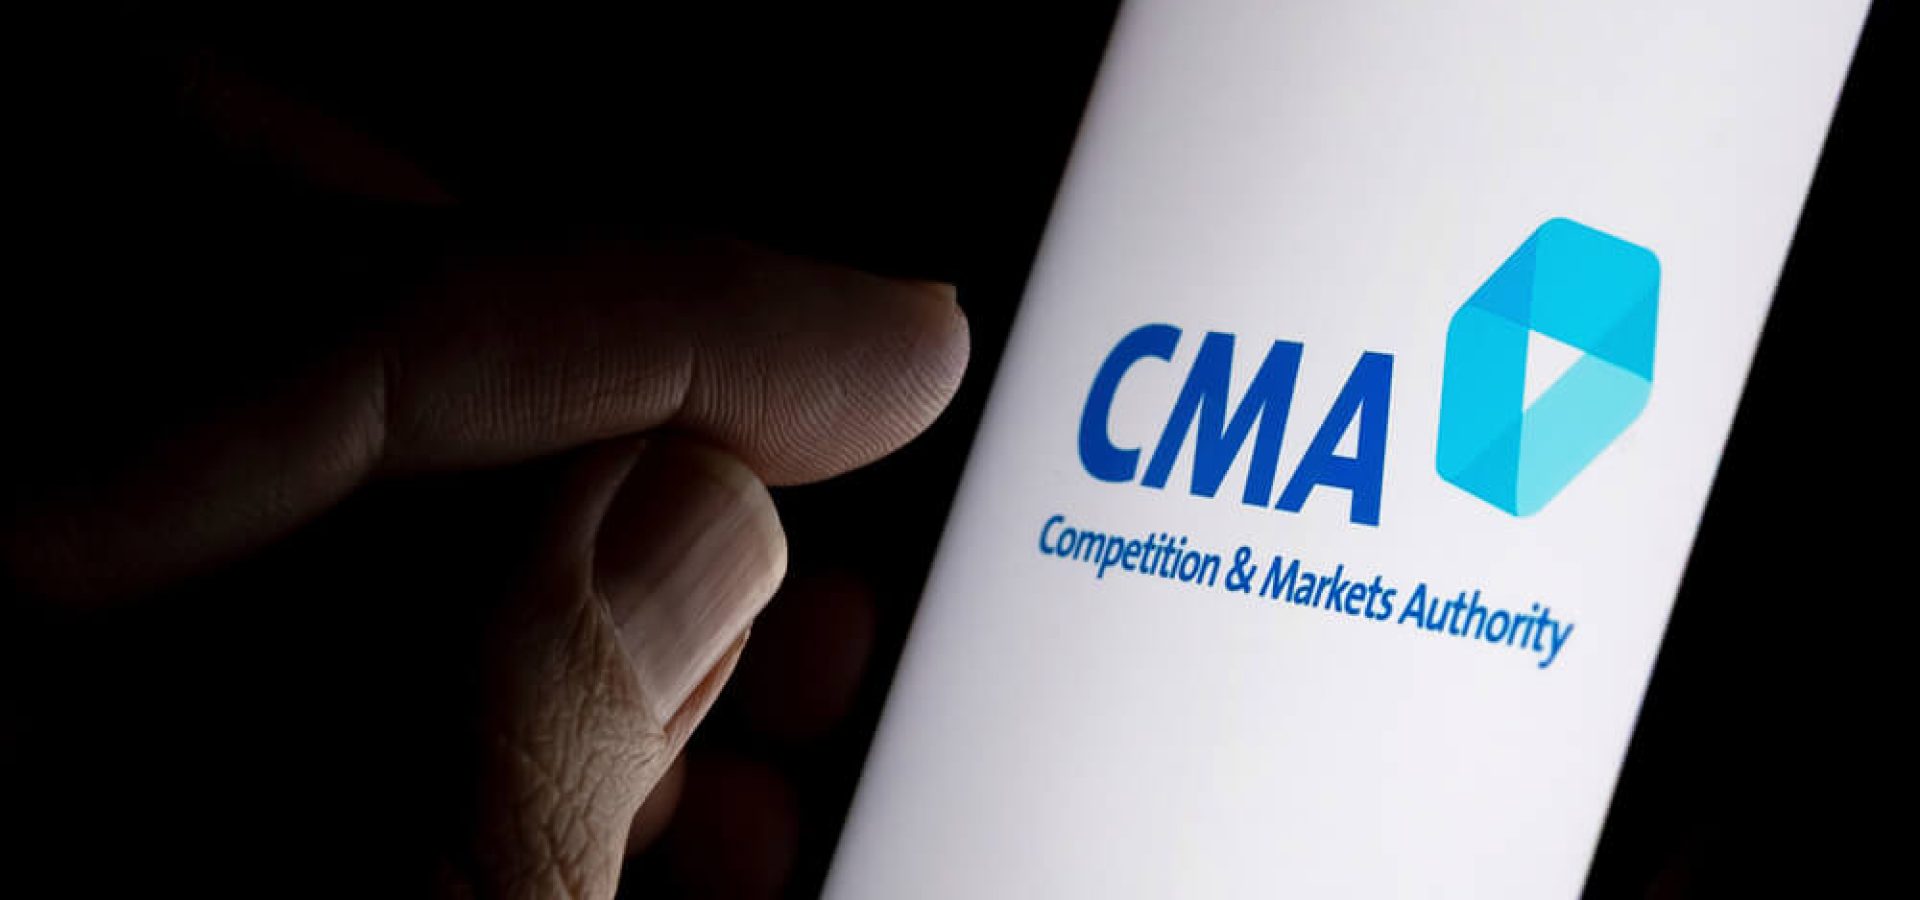 CMA Competition and Markets Authority logo on the screen and finger pointing at it.